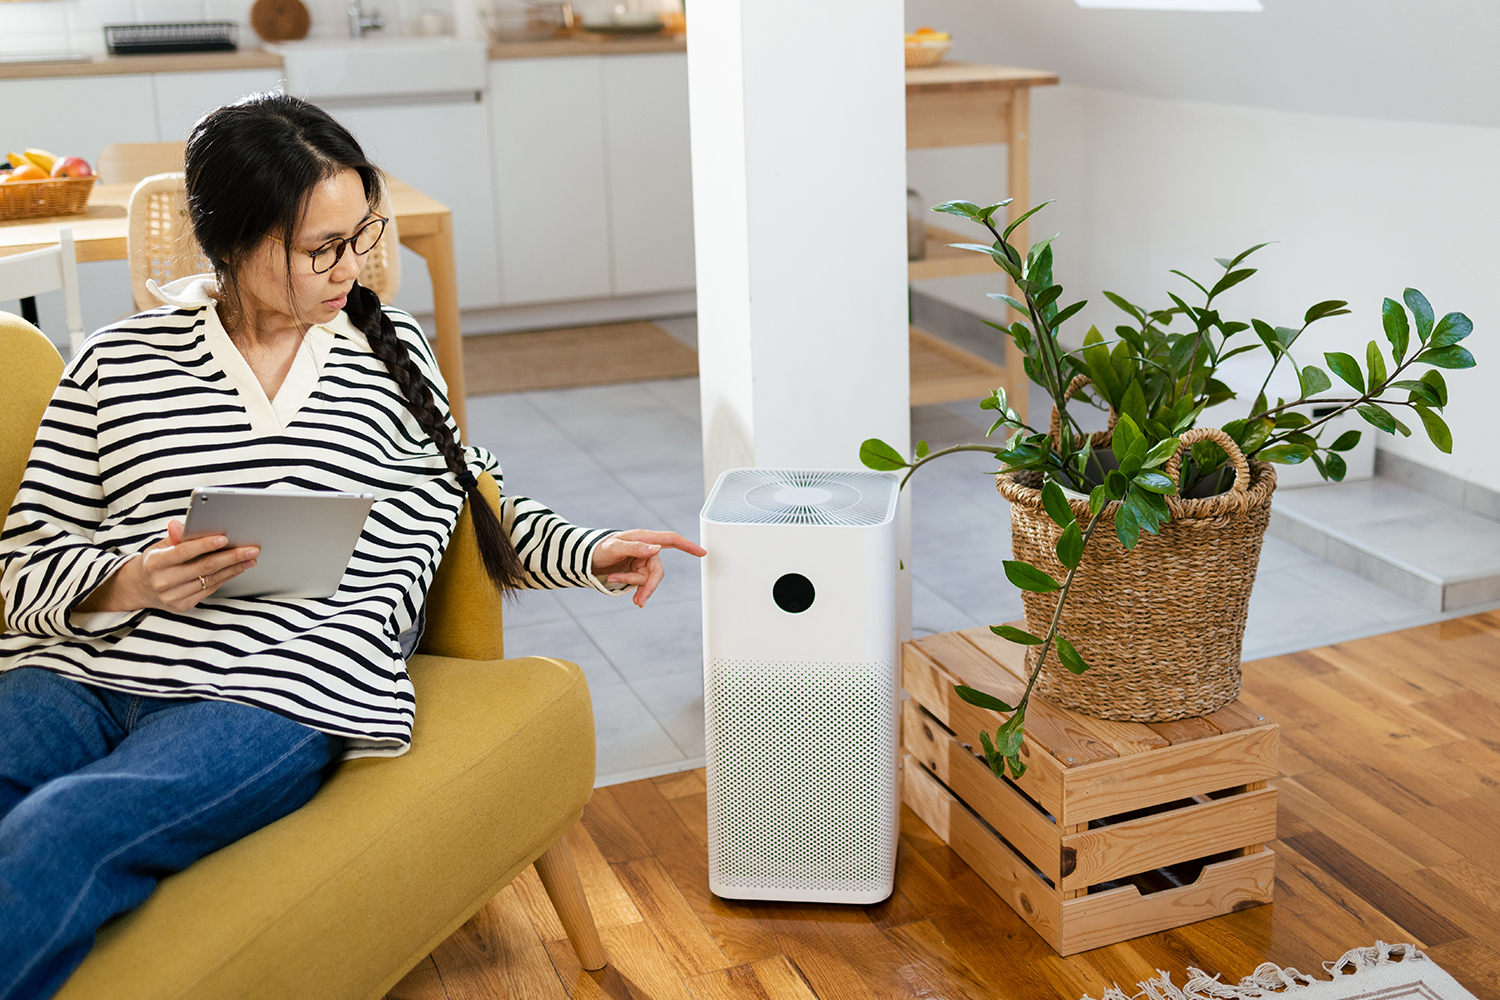 I used to clean vacation homes – my tips quicken the process, ditch paper towels and get an air purifier for maintenance